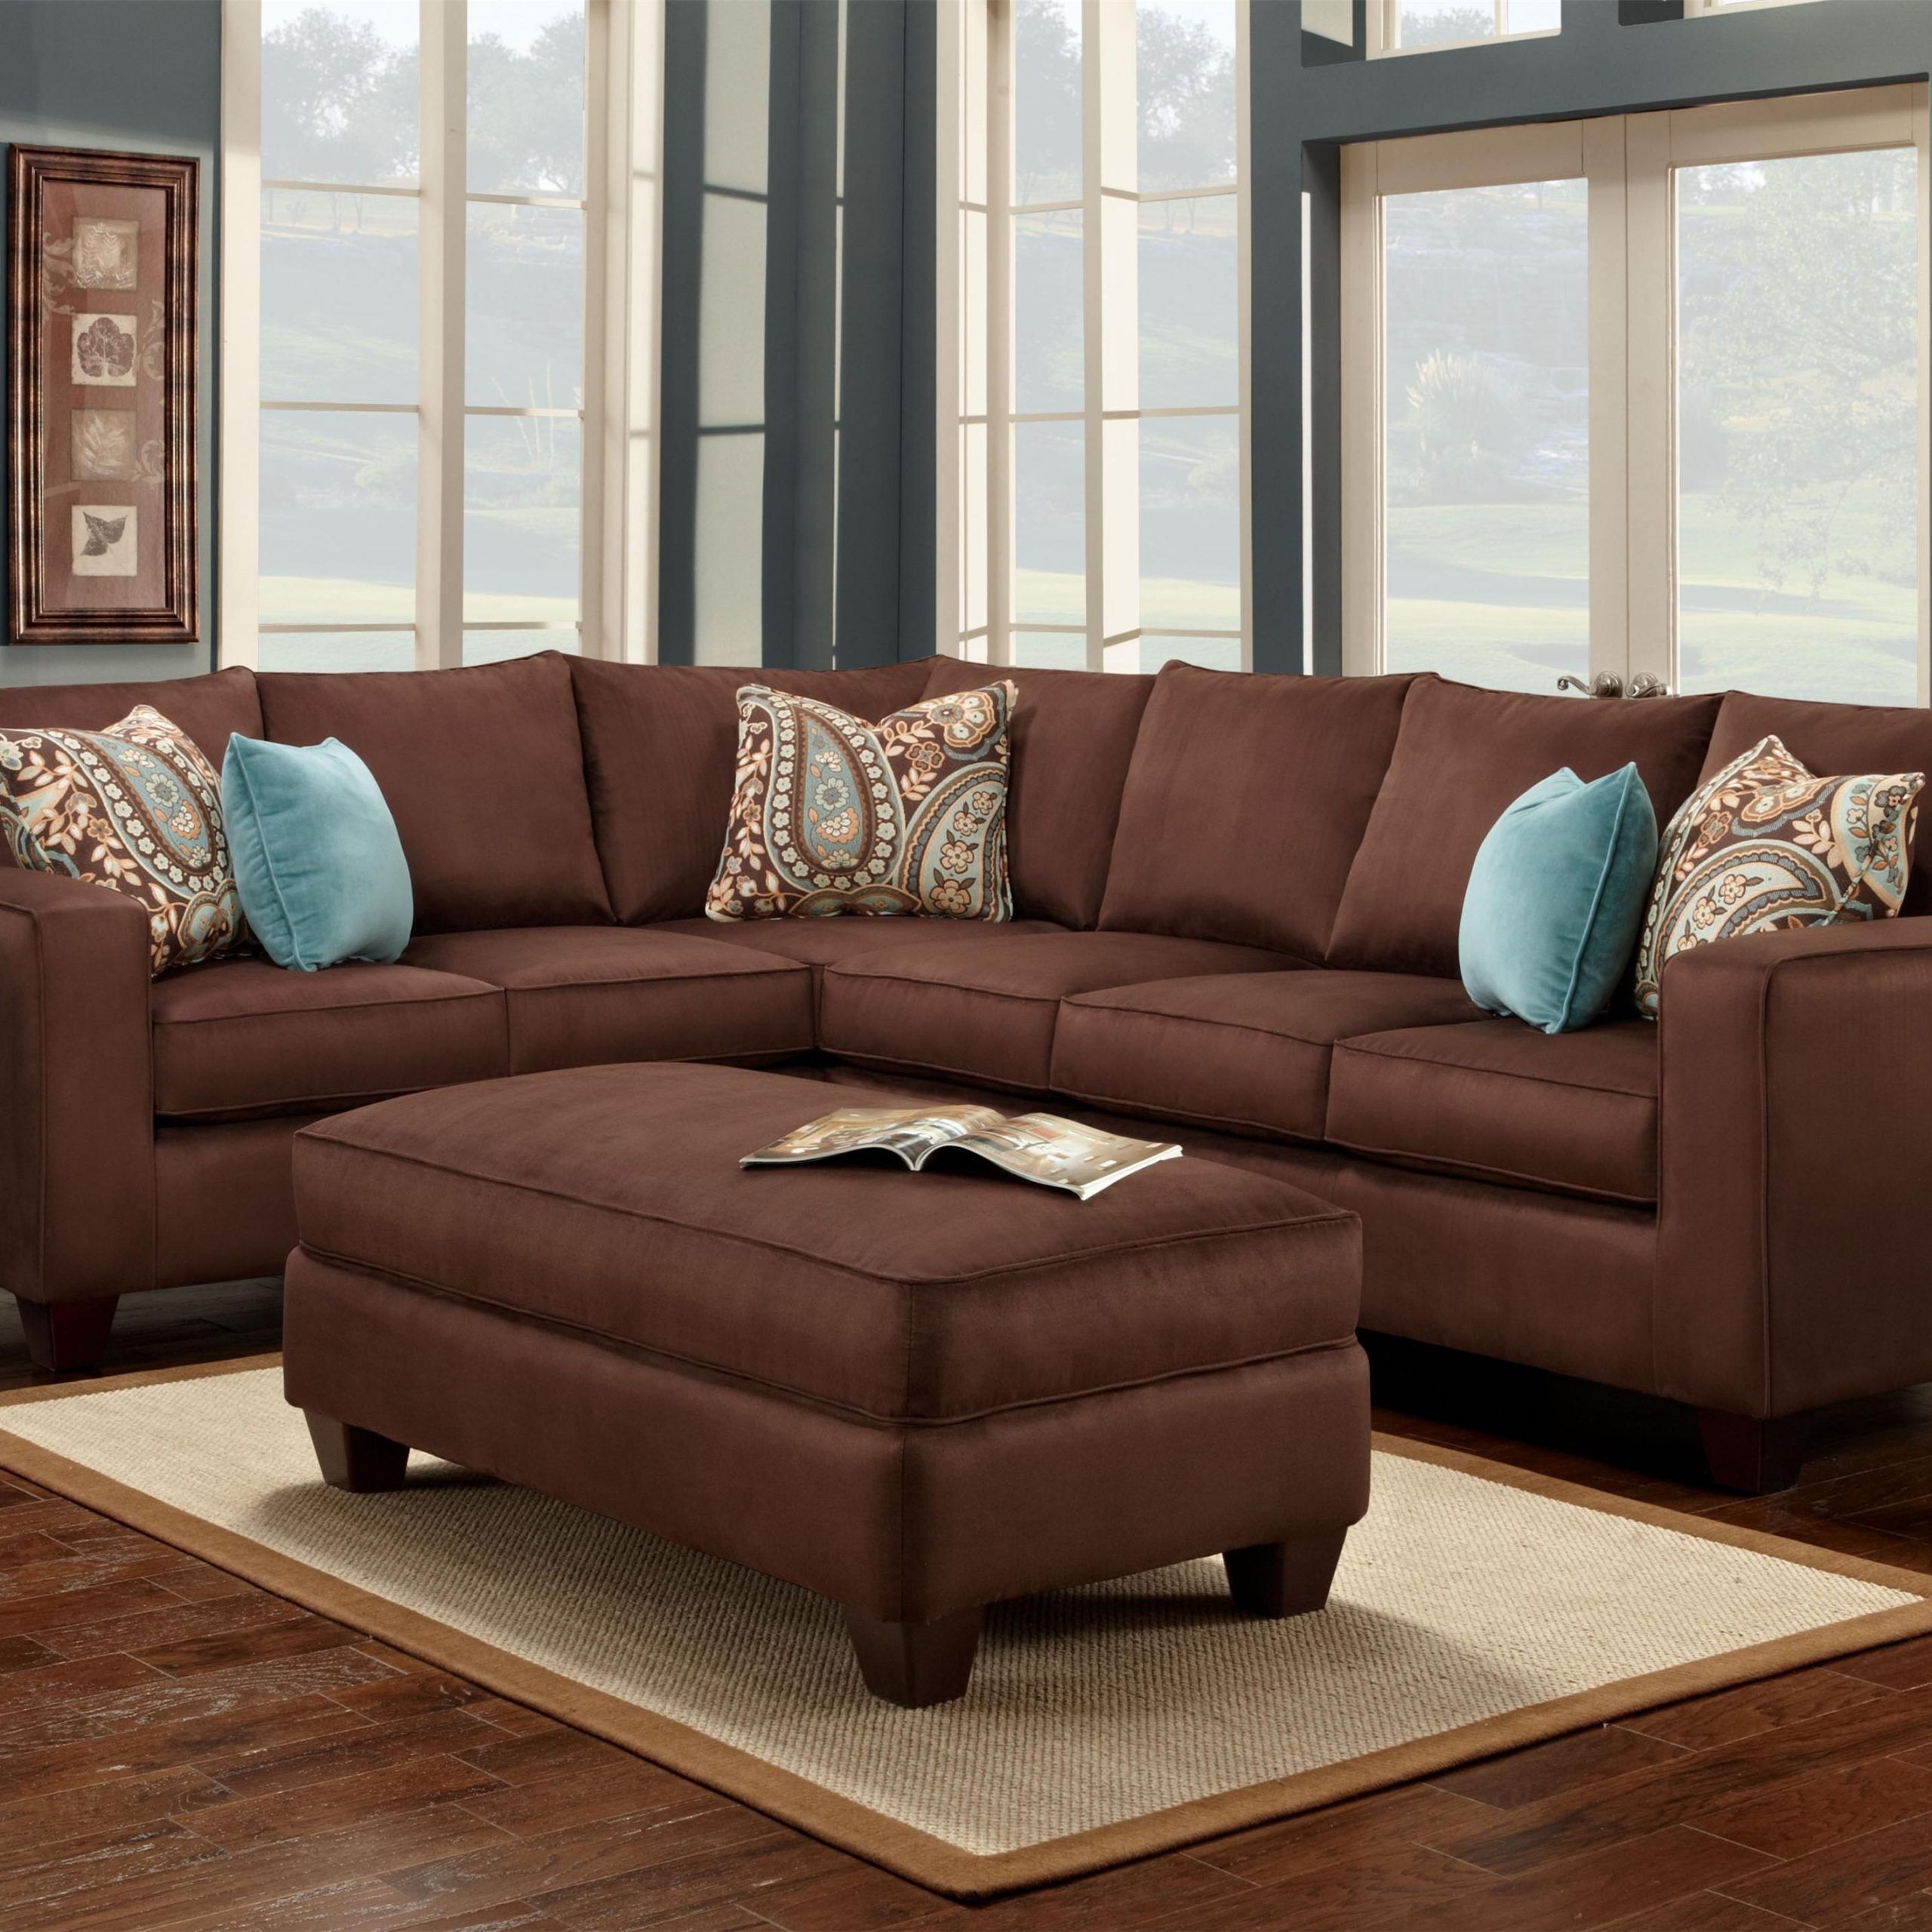 Featured Photo of Sofas in Chocolate Brown